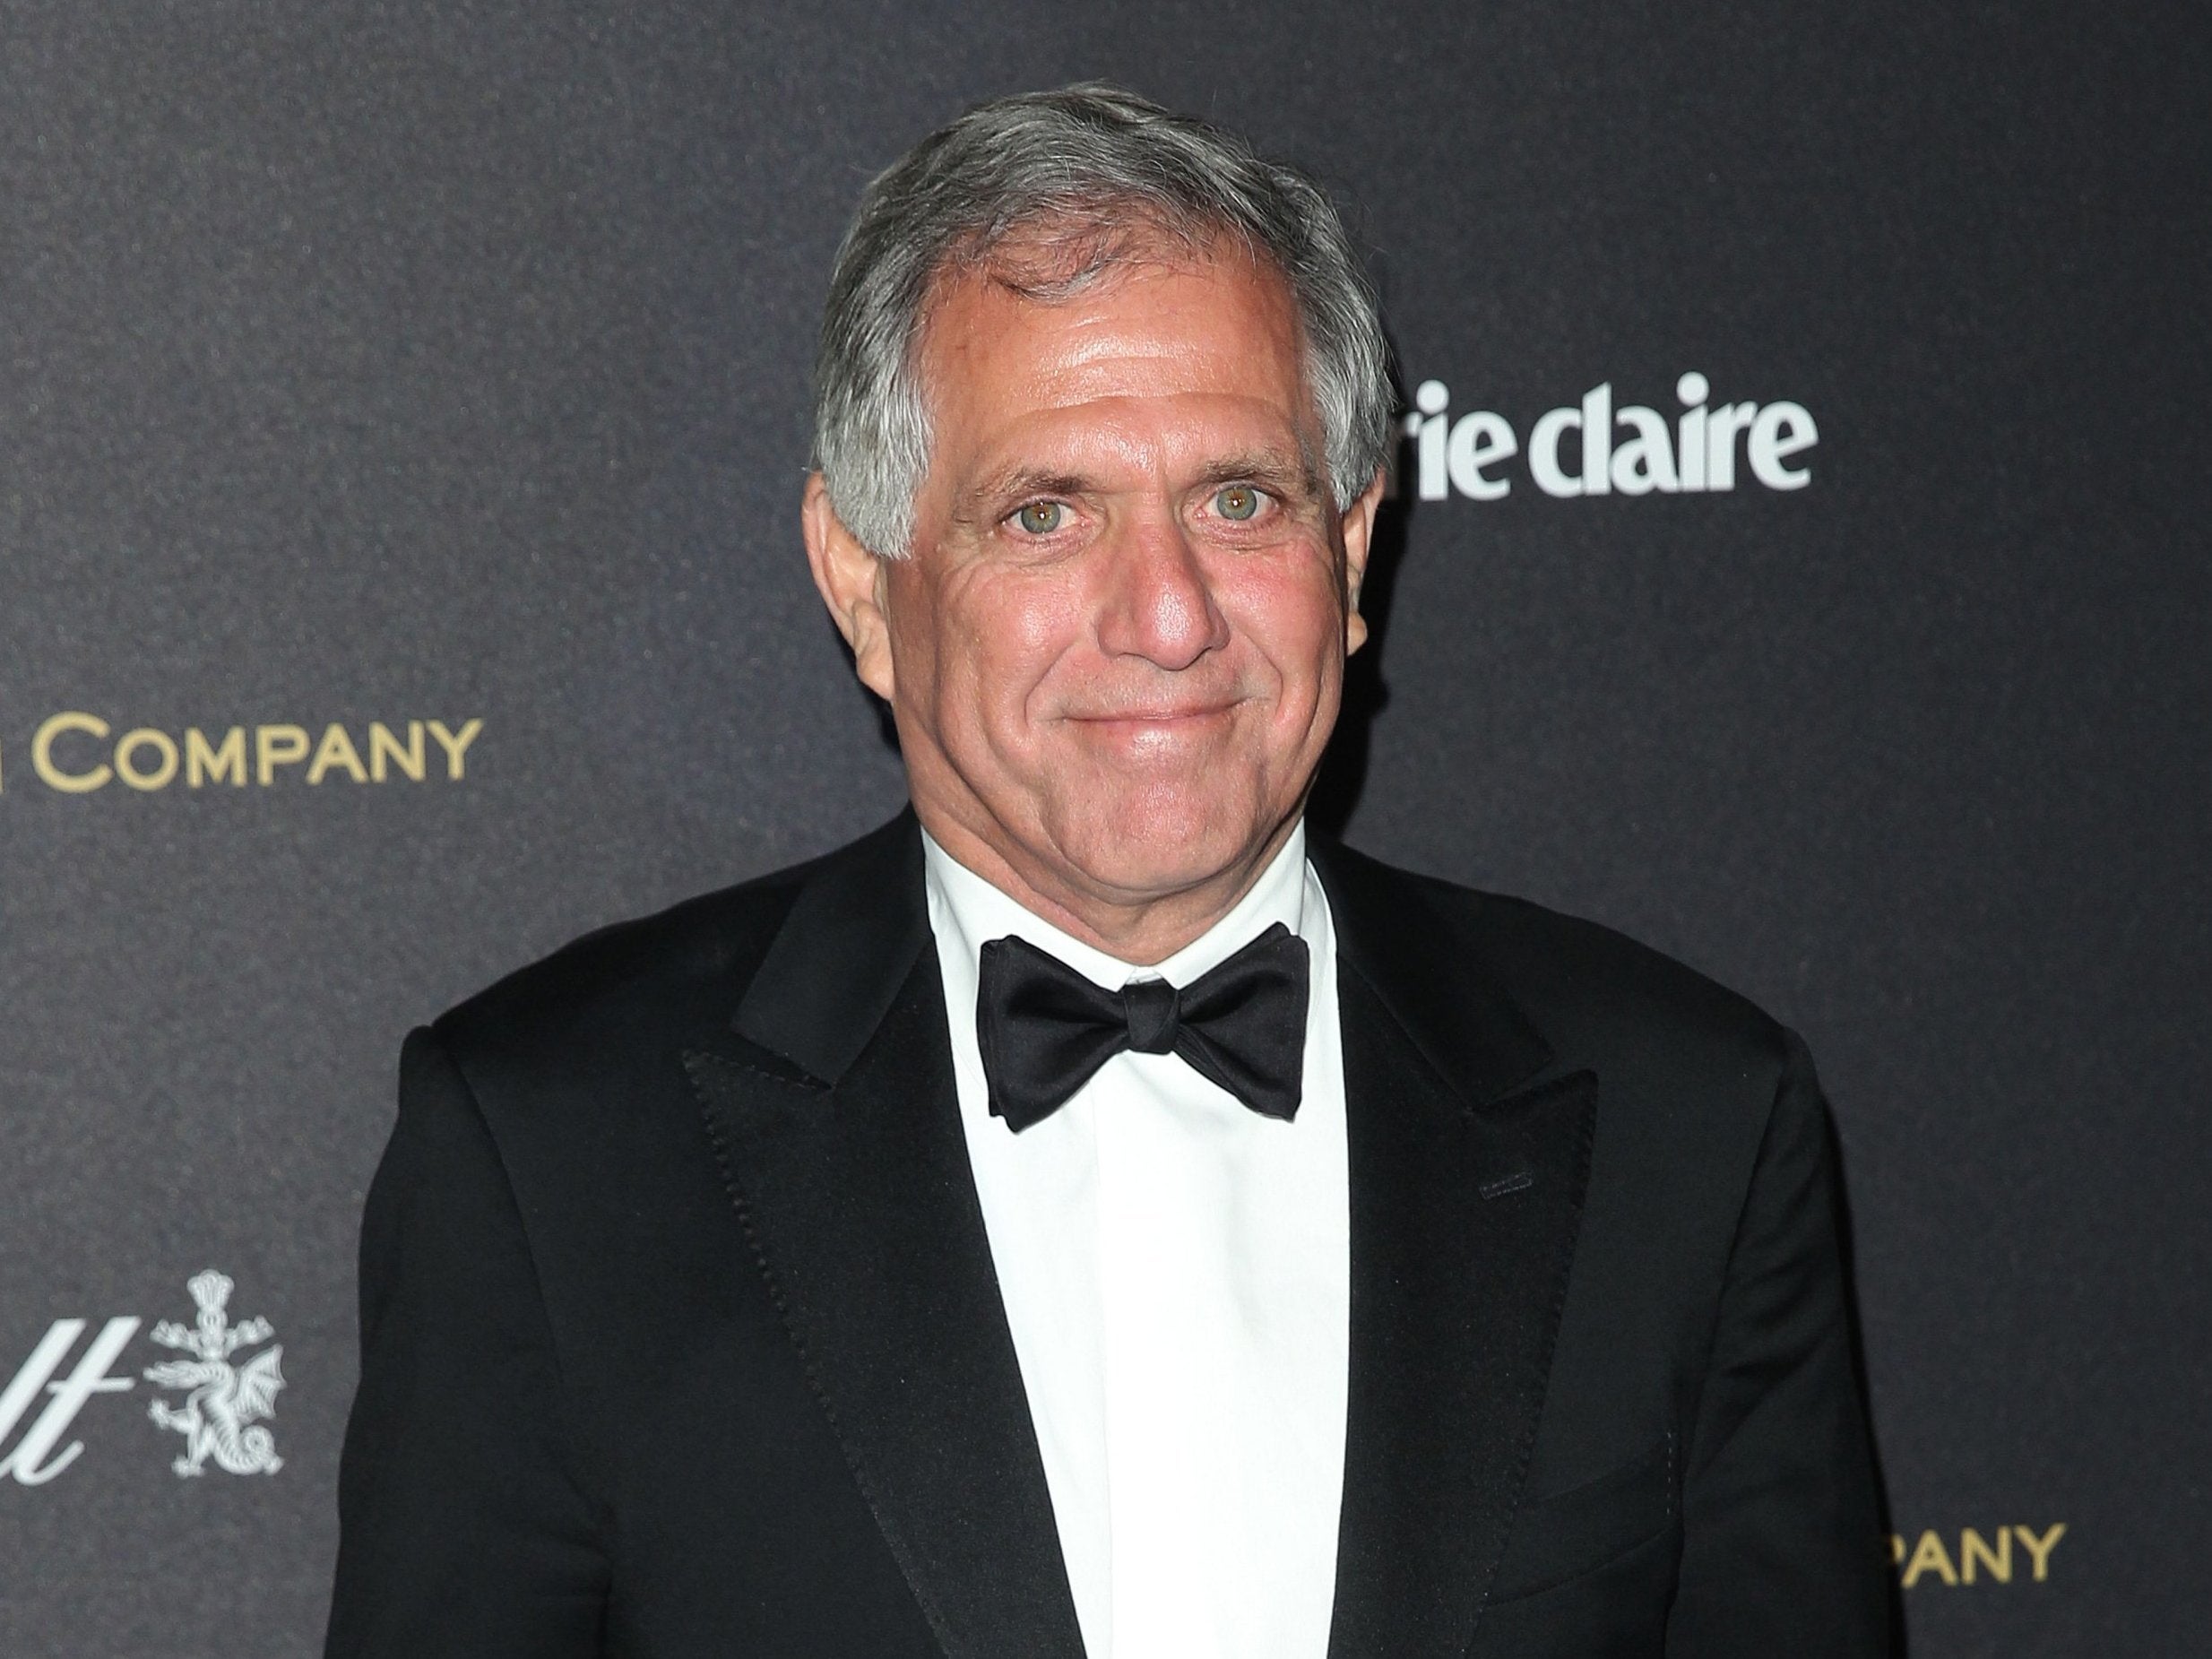 CBS investigating sexual misconduct allegations against CEO Les Moonves